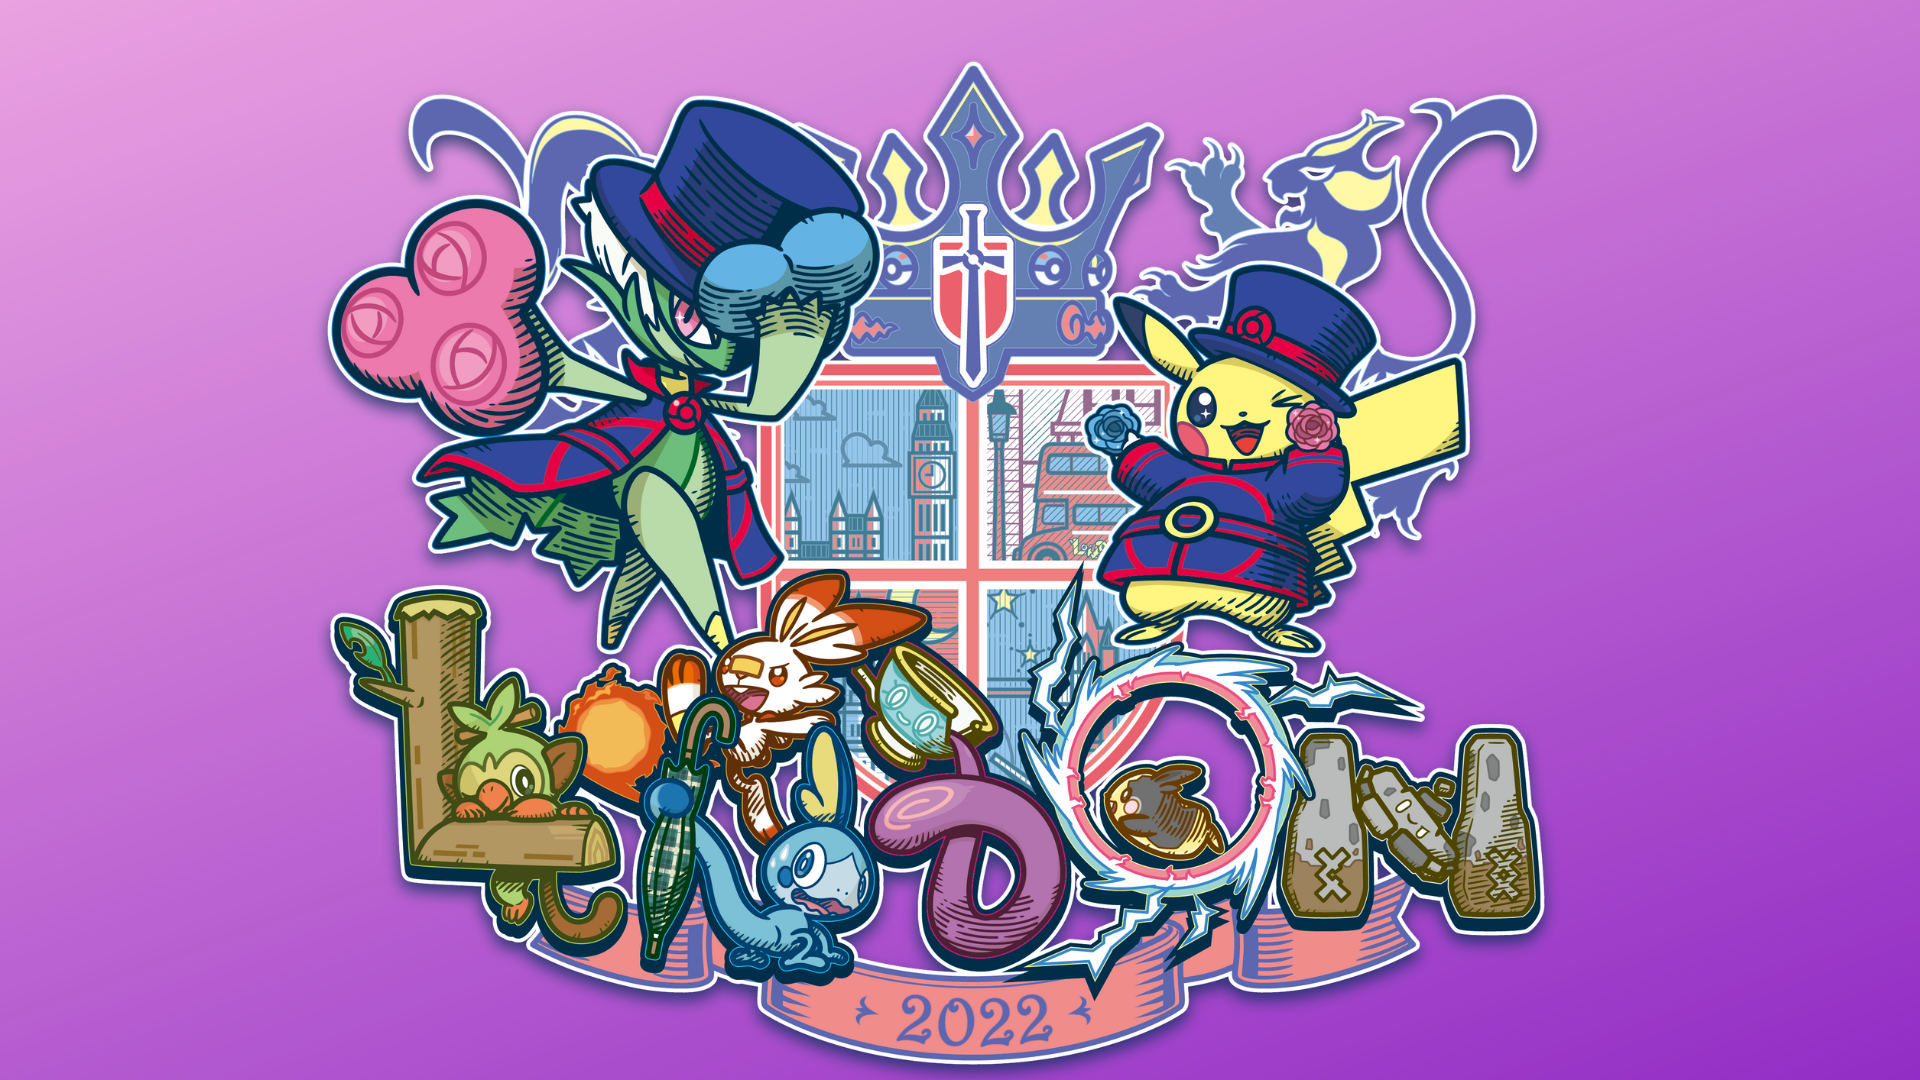 Logo from Pokemon Worlds 2022 featuring the word London spelled with different pokémon forming the letters with a pikachu in a blue suit waving a top hat next to a Roserade also waving a tophat